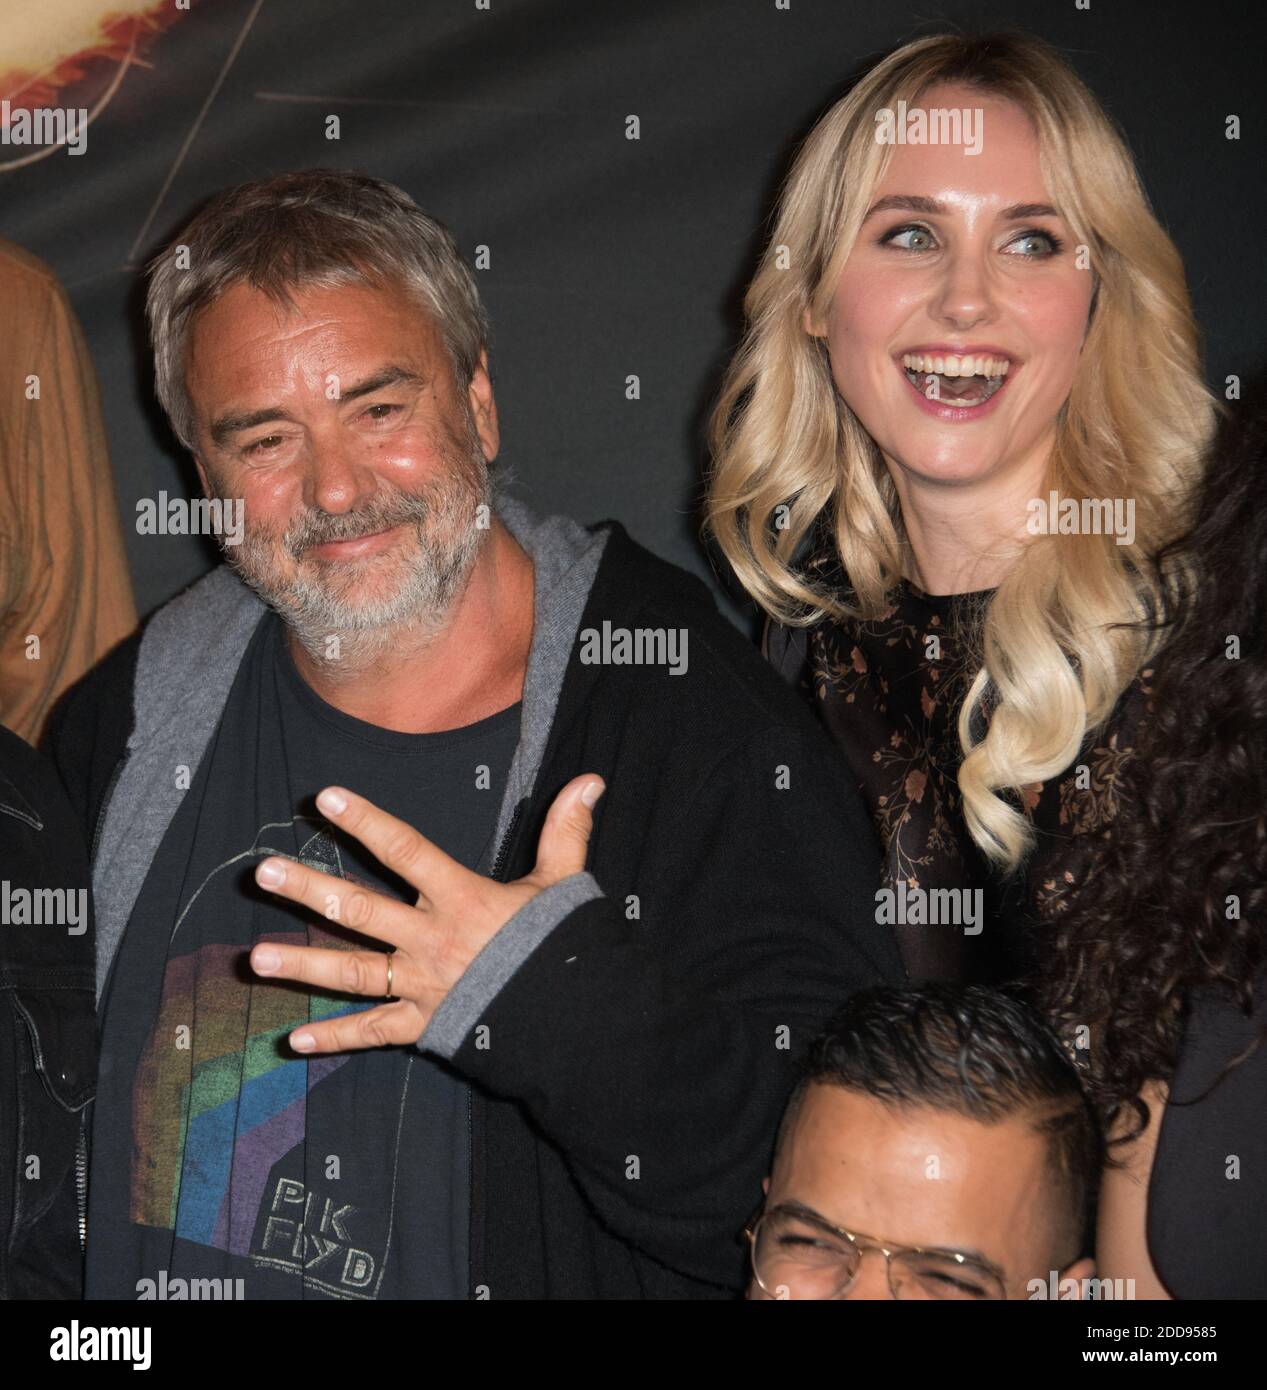 Filmmaker Luc Besson accused of rape by the actress Sand Van Roy - Luc  Besson attending the Taxi 5 movie premiere with Sand Van Roy assistent at  the Grand Rex in Paris,